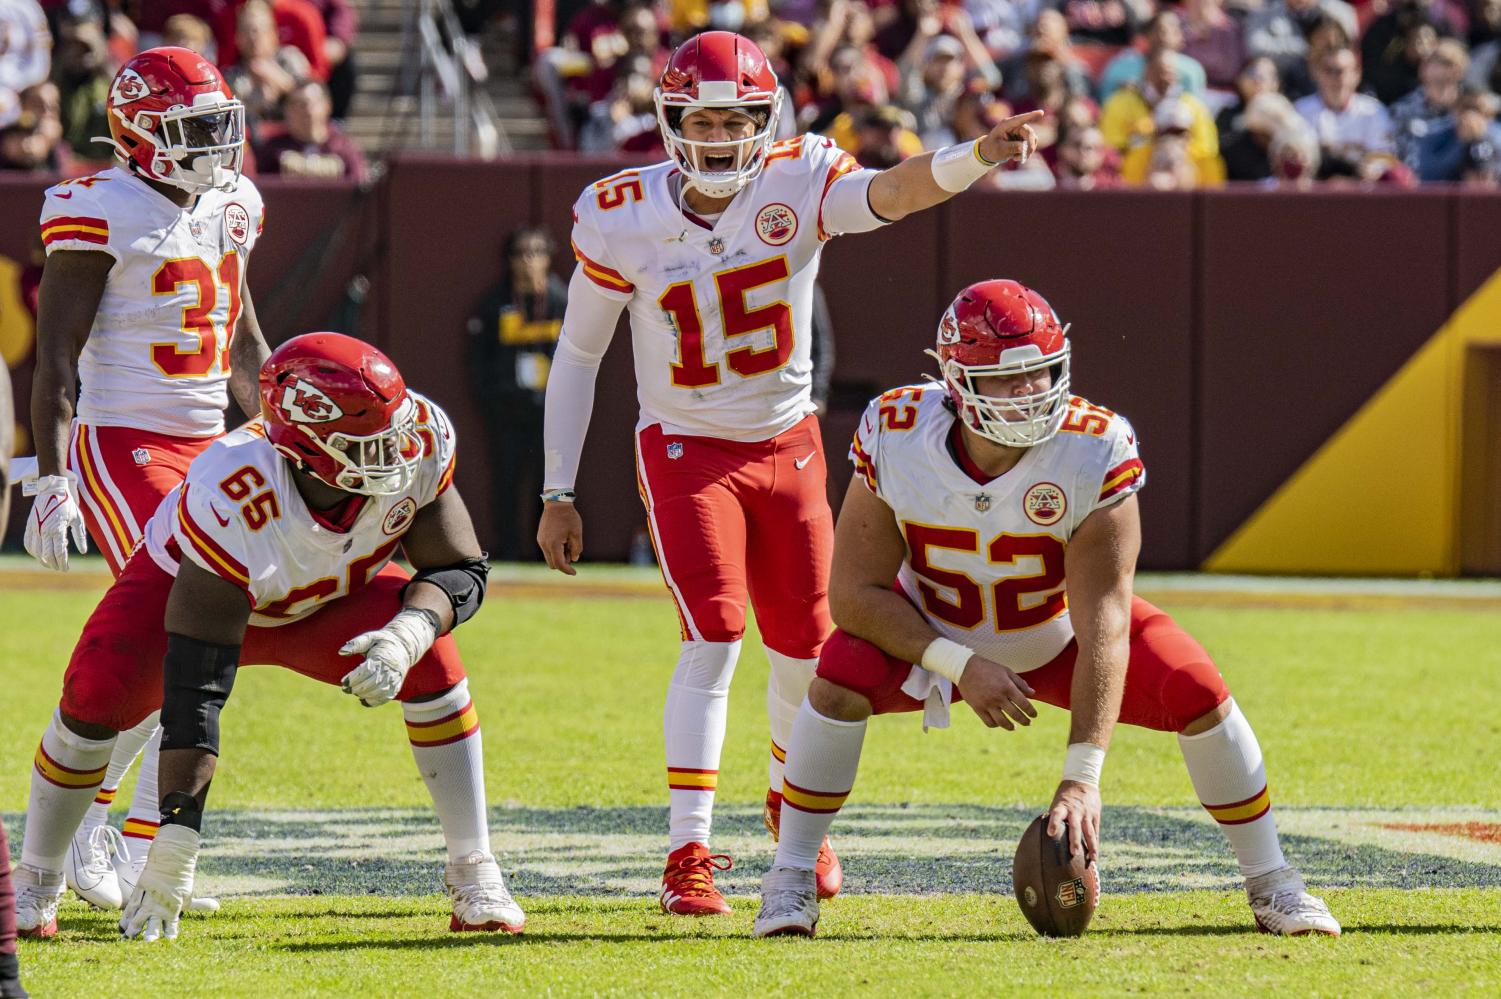 Chiefs overcome 10-point halftime deficit to defeat Eagles